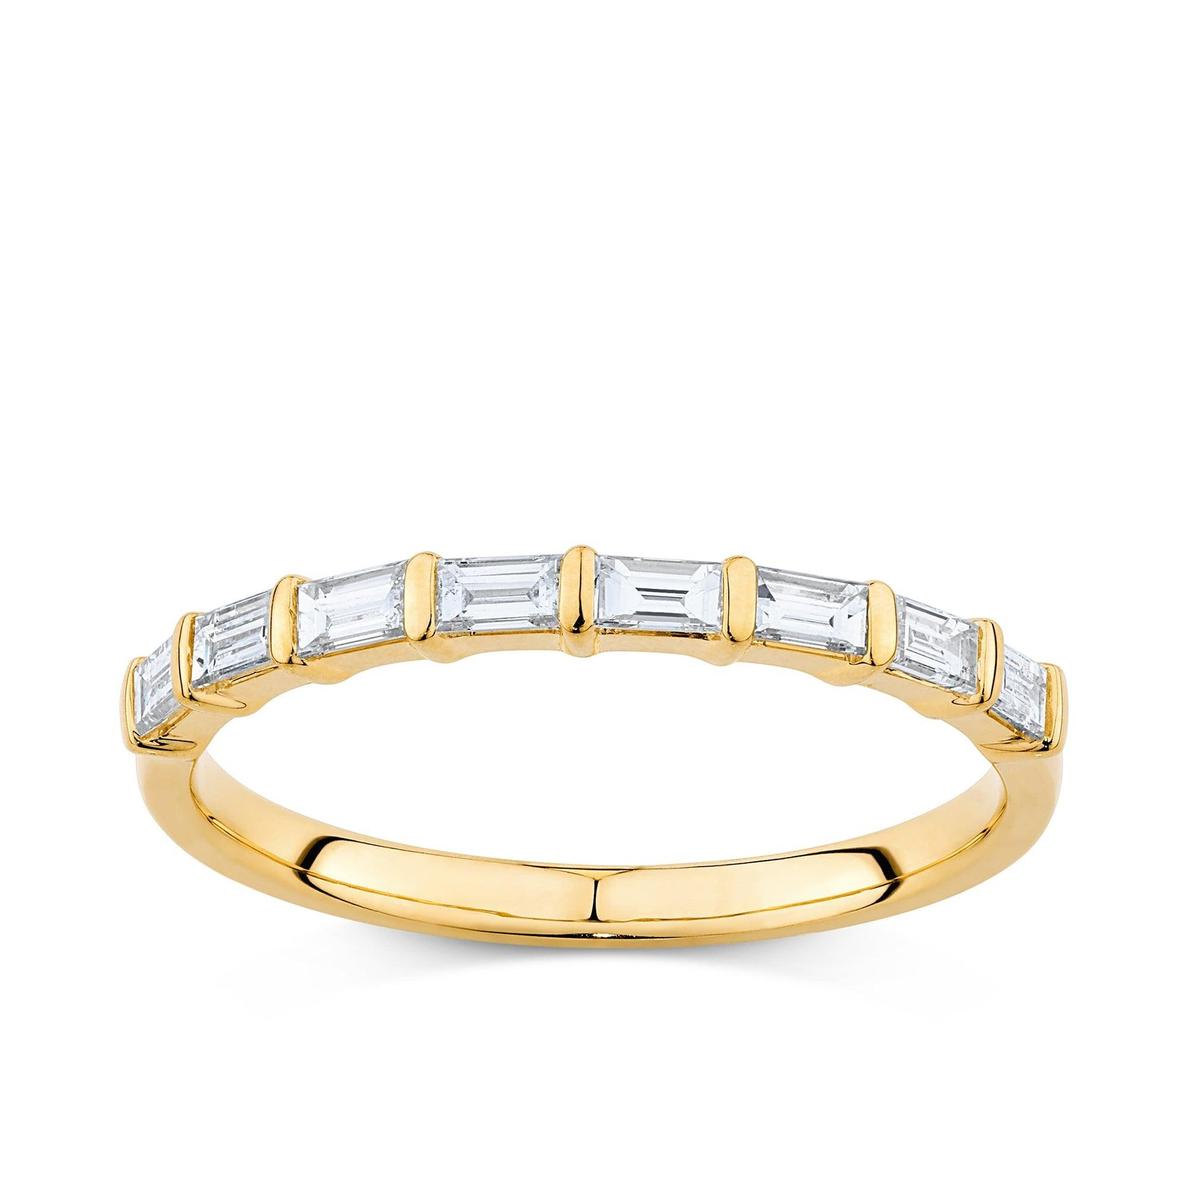 Diamond Baguette Wedding Ring in 9ct Yellow Gold TDW 0.33ct offers in Wallace Bishop